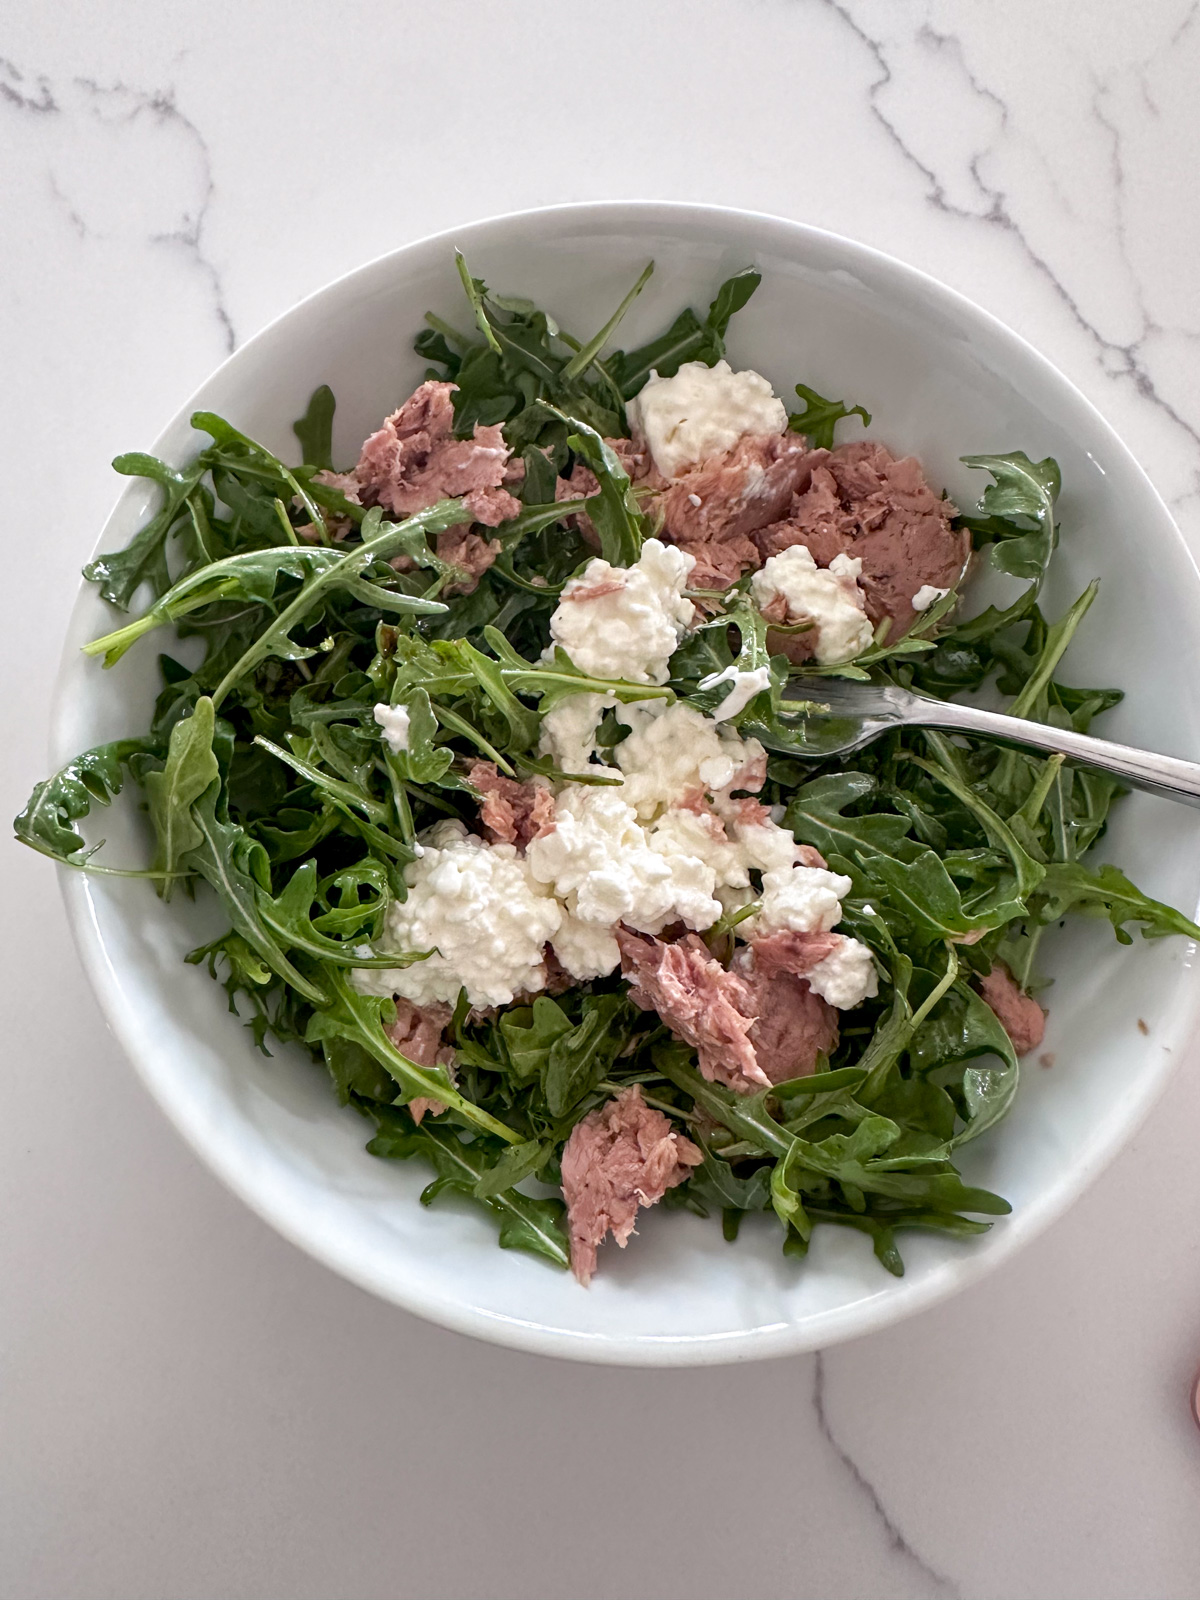 A random salad with tuna and cottage cheese